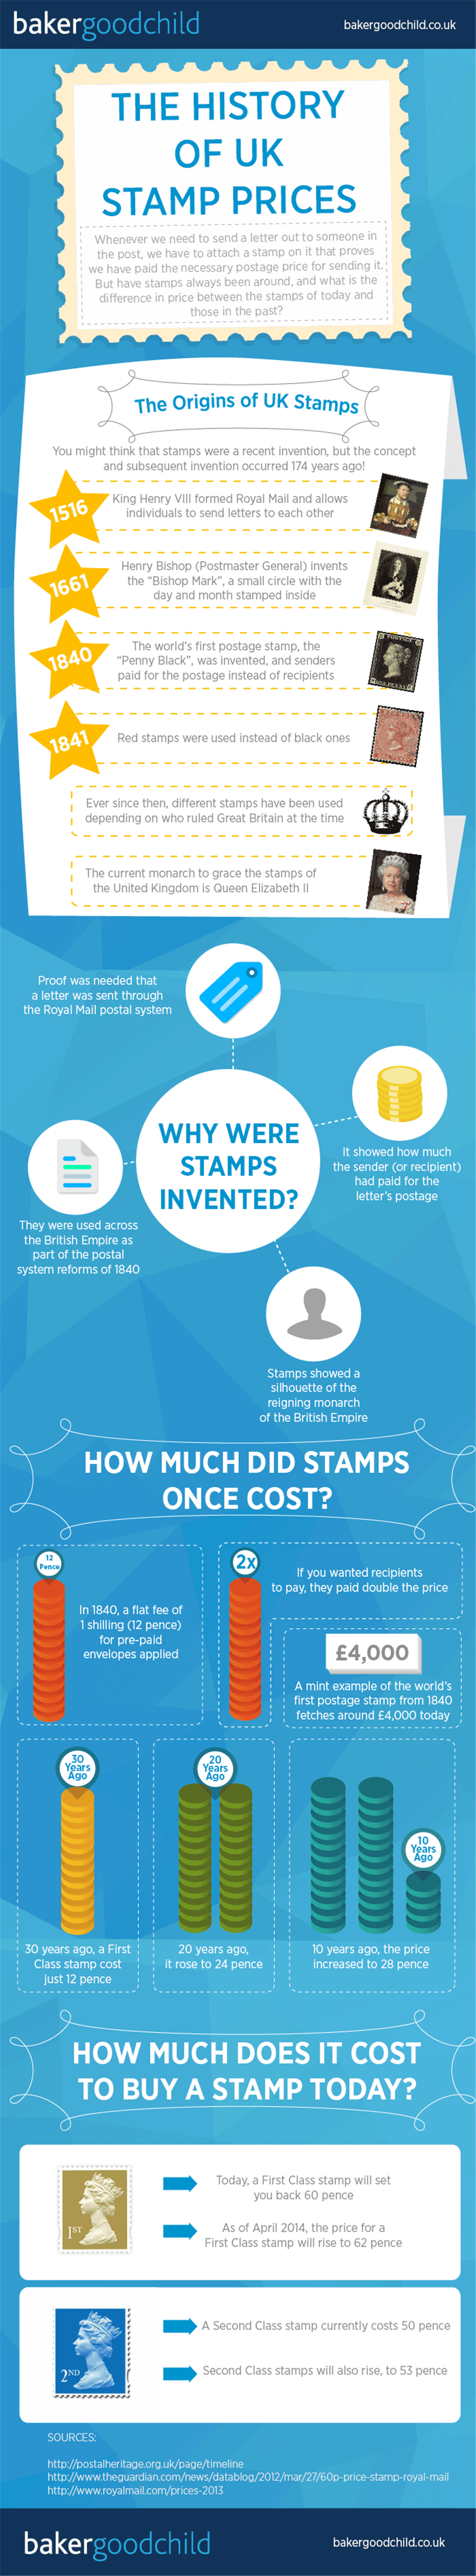 The History of UK Stamp Prices